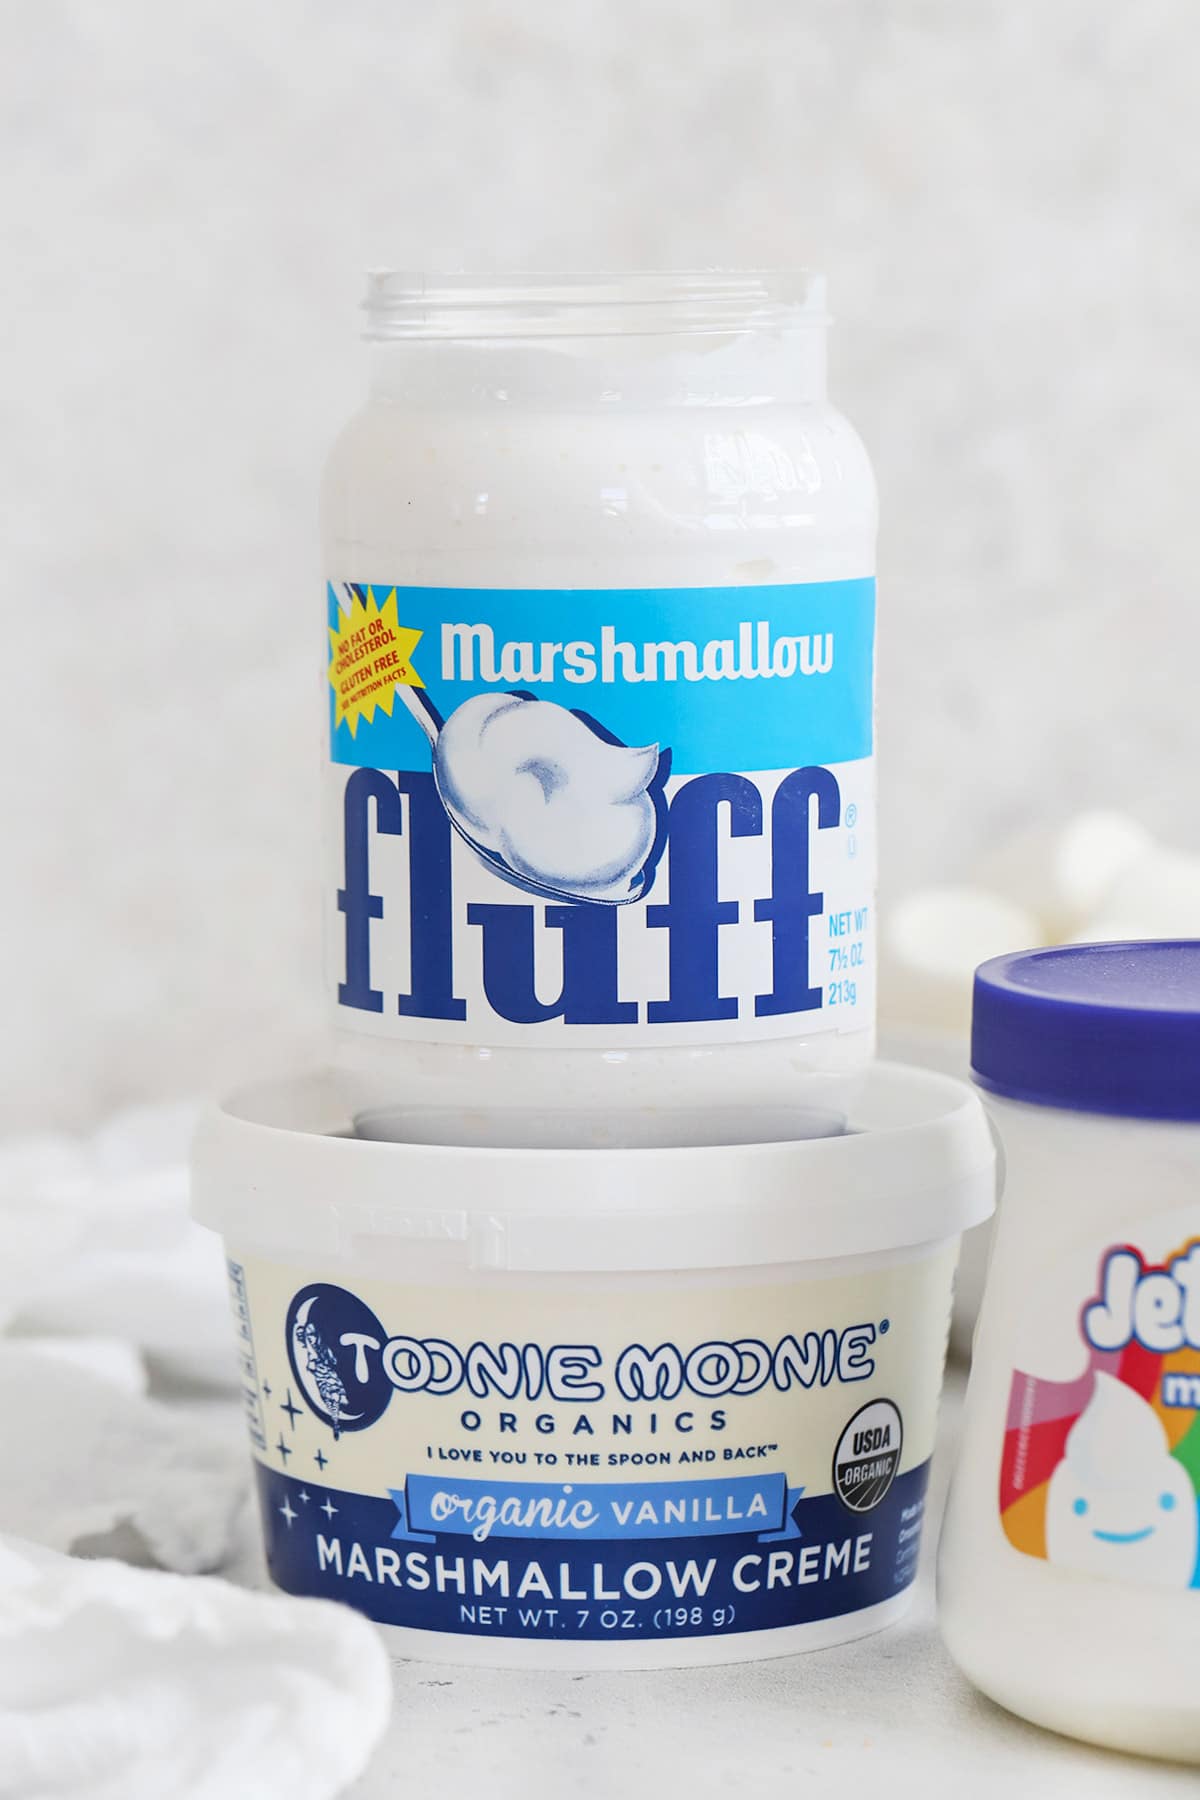 Front view of three brands of gluten-free marshmallow fluff/marshmallow creme